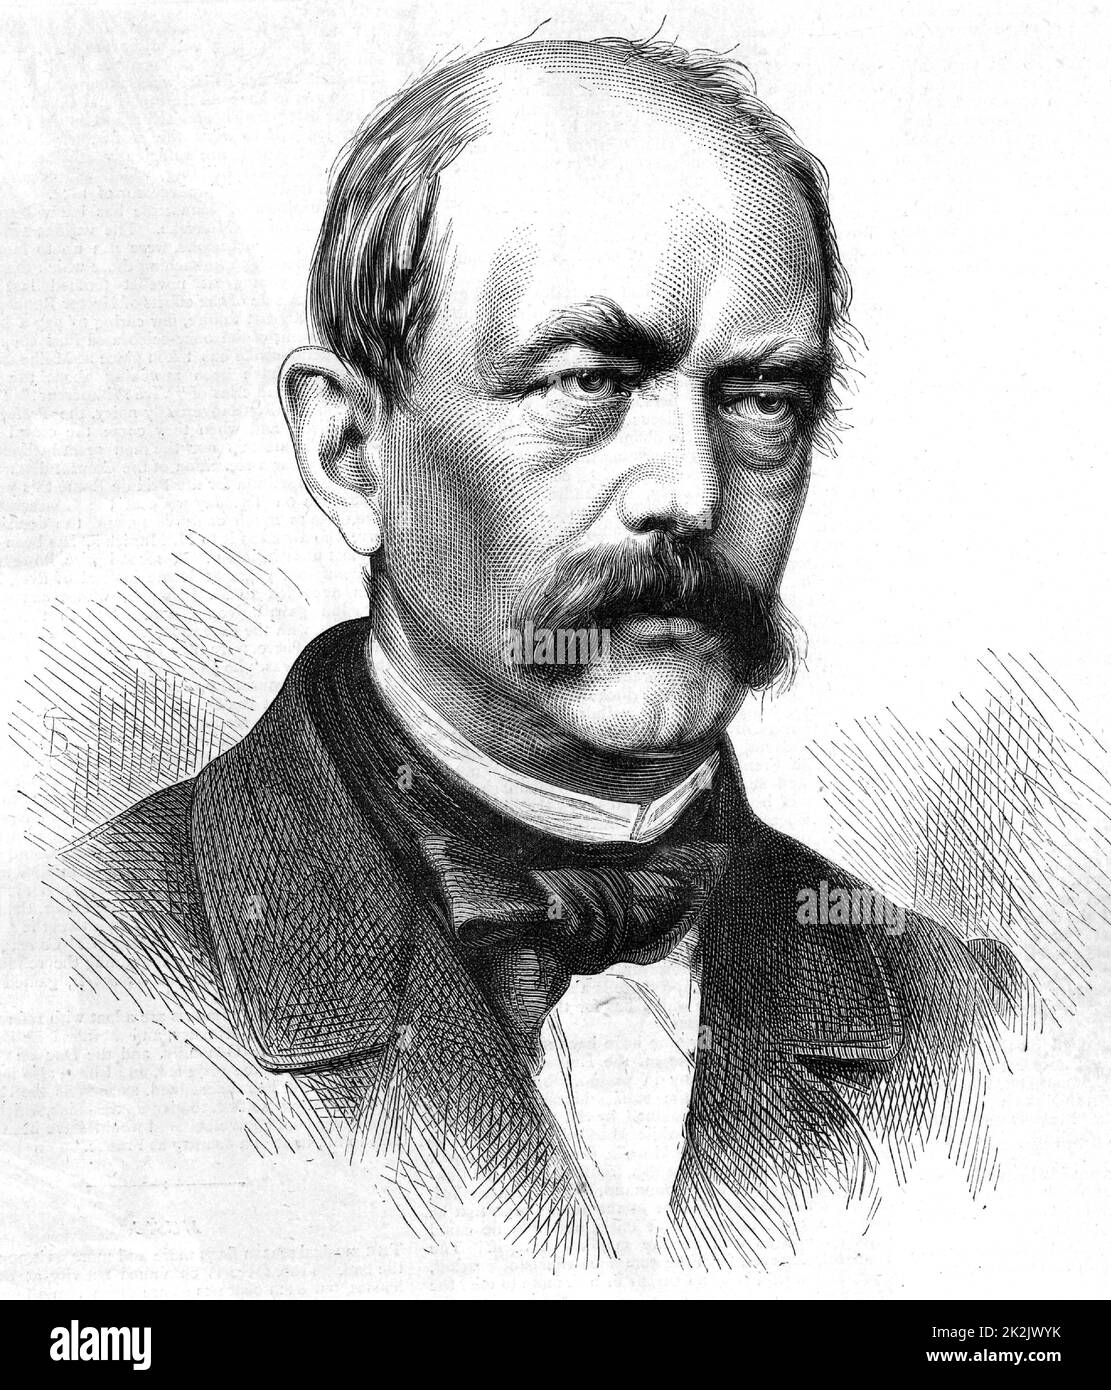 Otto Edward Leopold von Bismarck (1815-98) German/Prussian statesman. Creator of modern Germany and Chancellor of Germany 1871-1890. Portrait engraving published in 1886, the year of German reorganisation. From 'The Illustrated London News' (London, 1866). Stock Photo